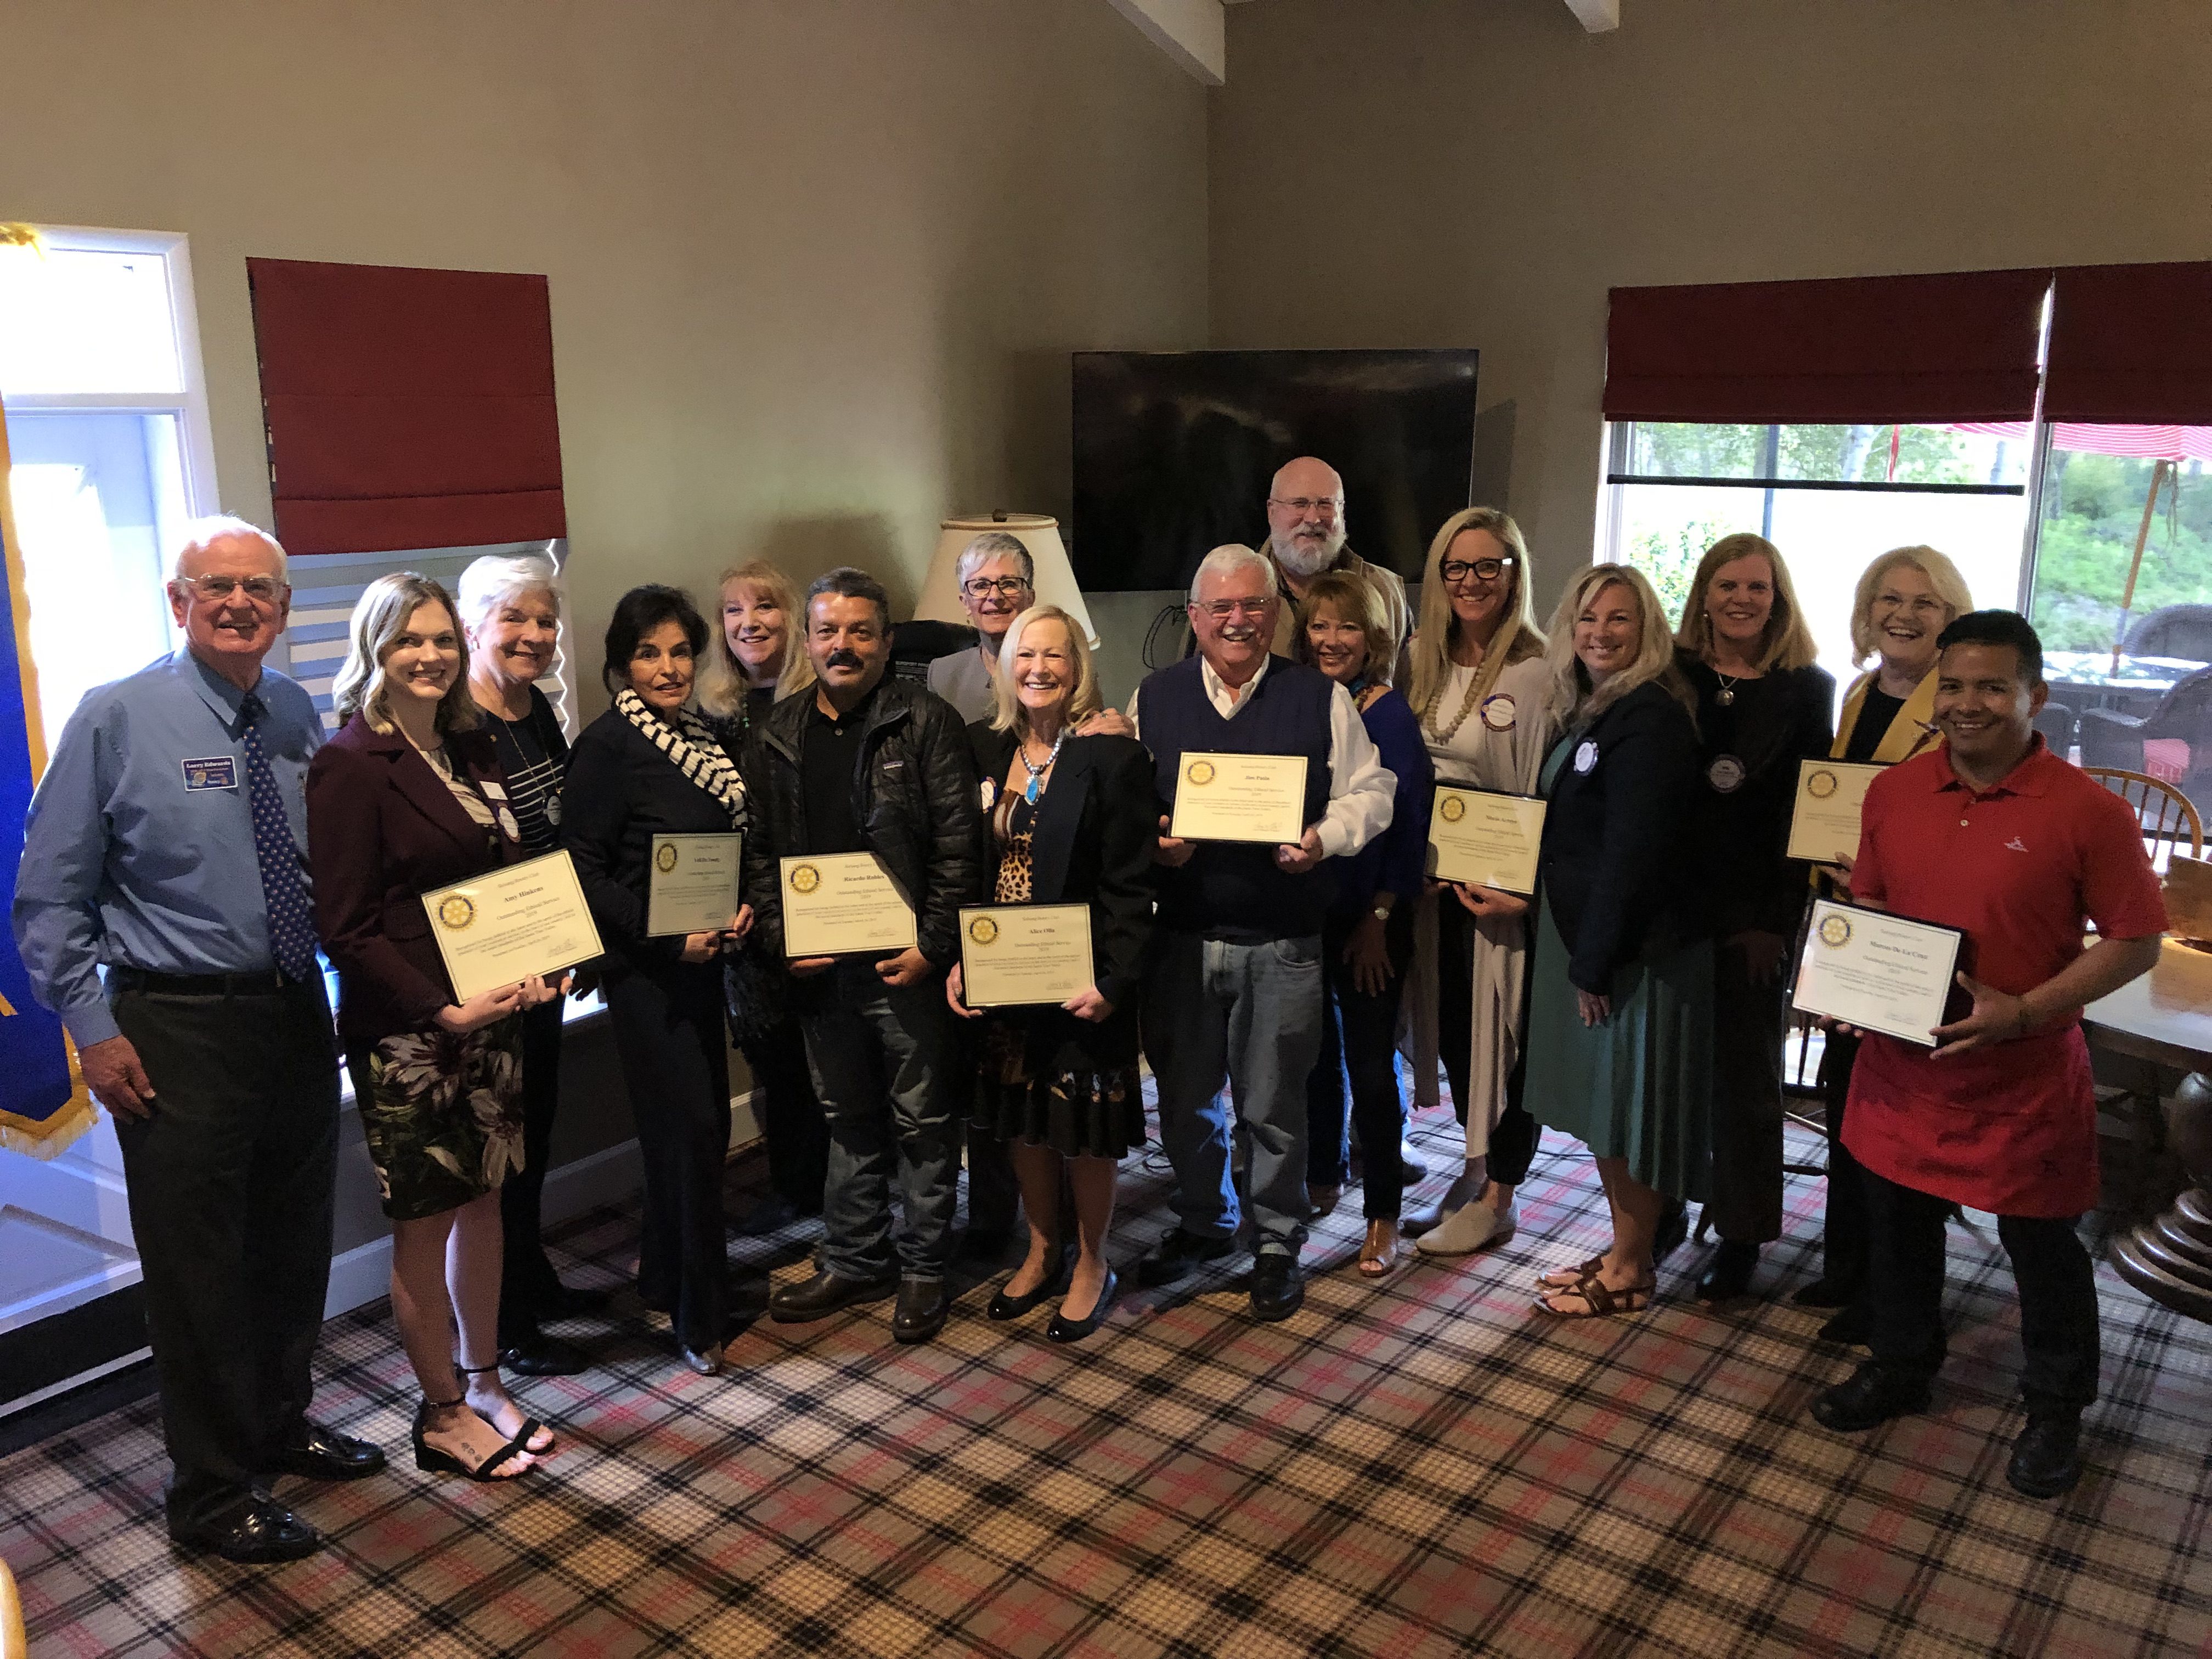 Solvang Rotary gives Ethical Service Awards